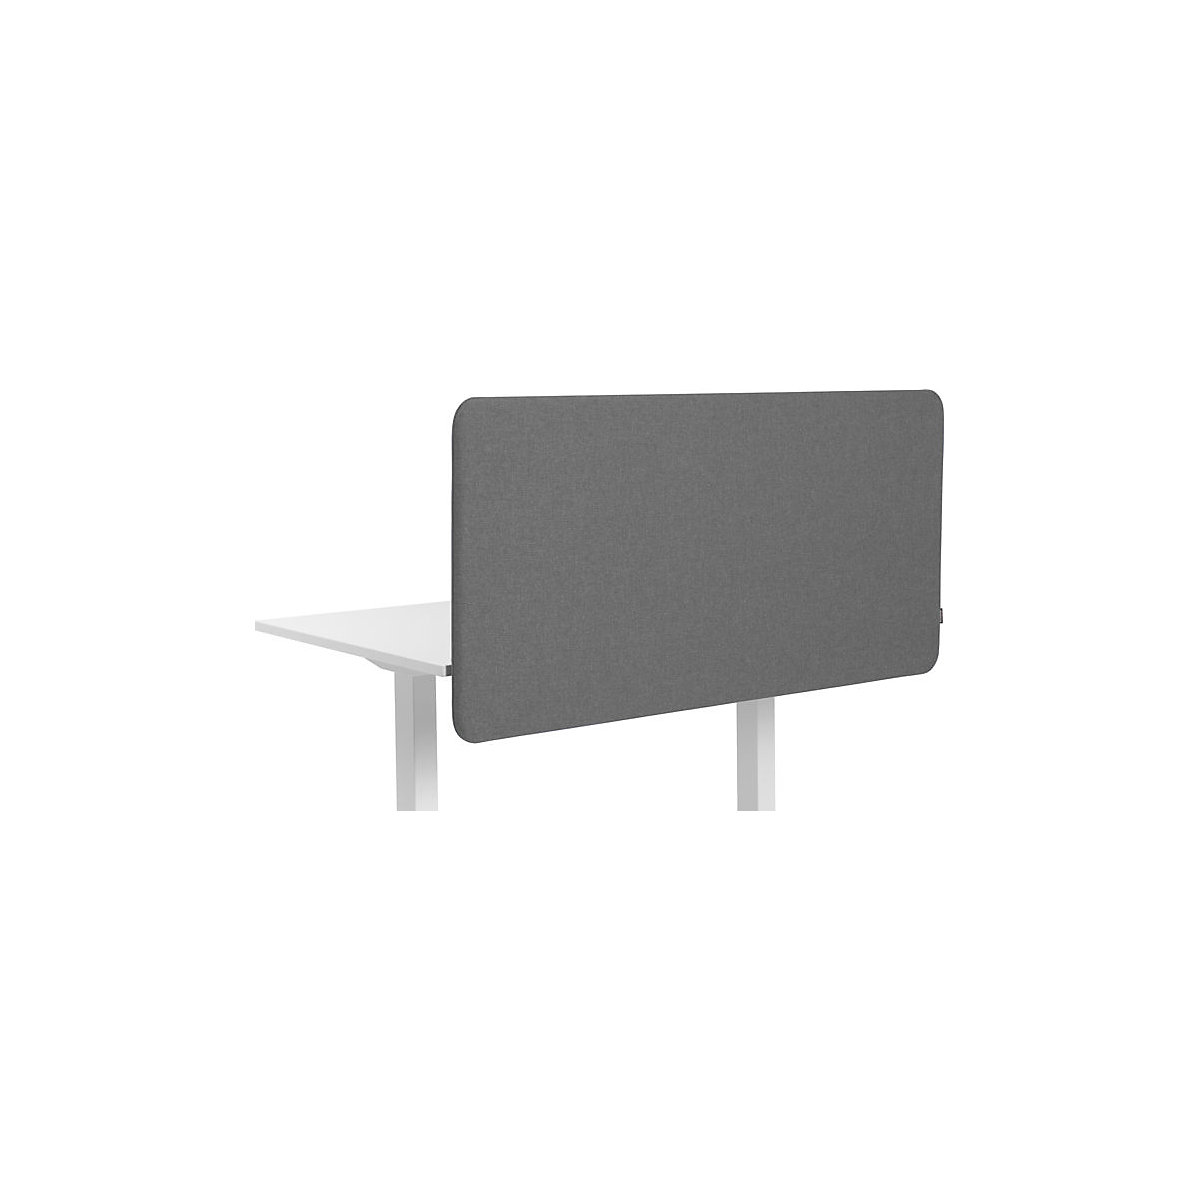 Softline Salsa acoustic desk partition, suspended downwards, HxW 650 x 1200 mm, fabric, grey-4